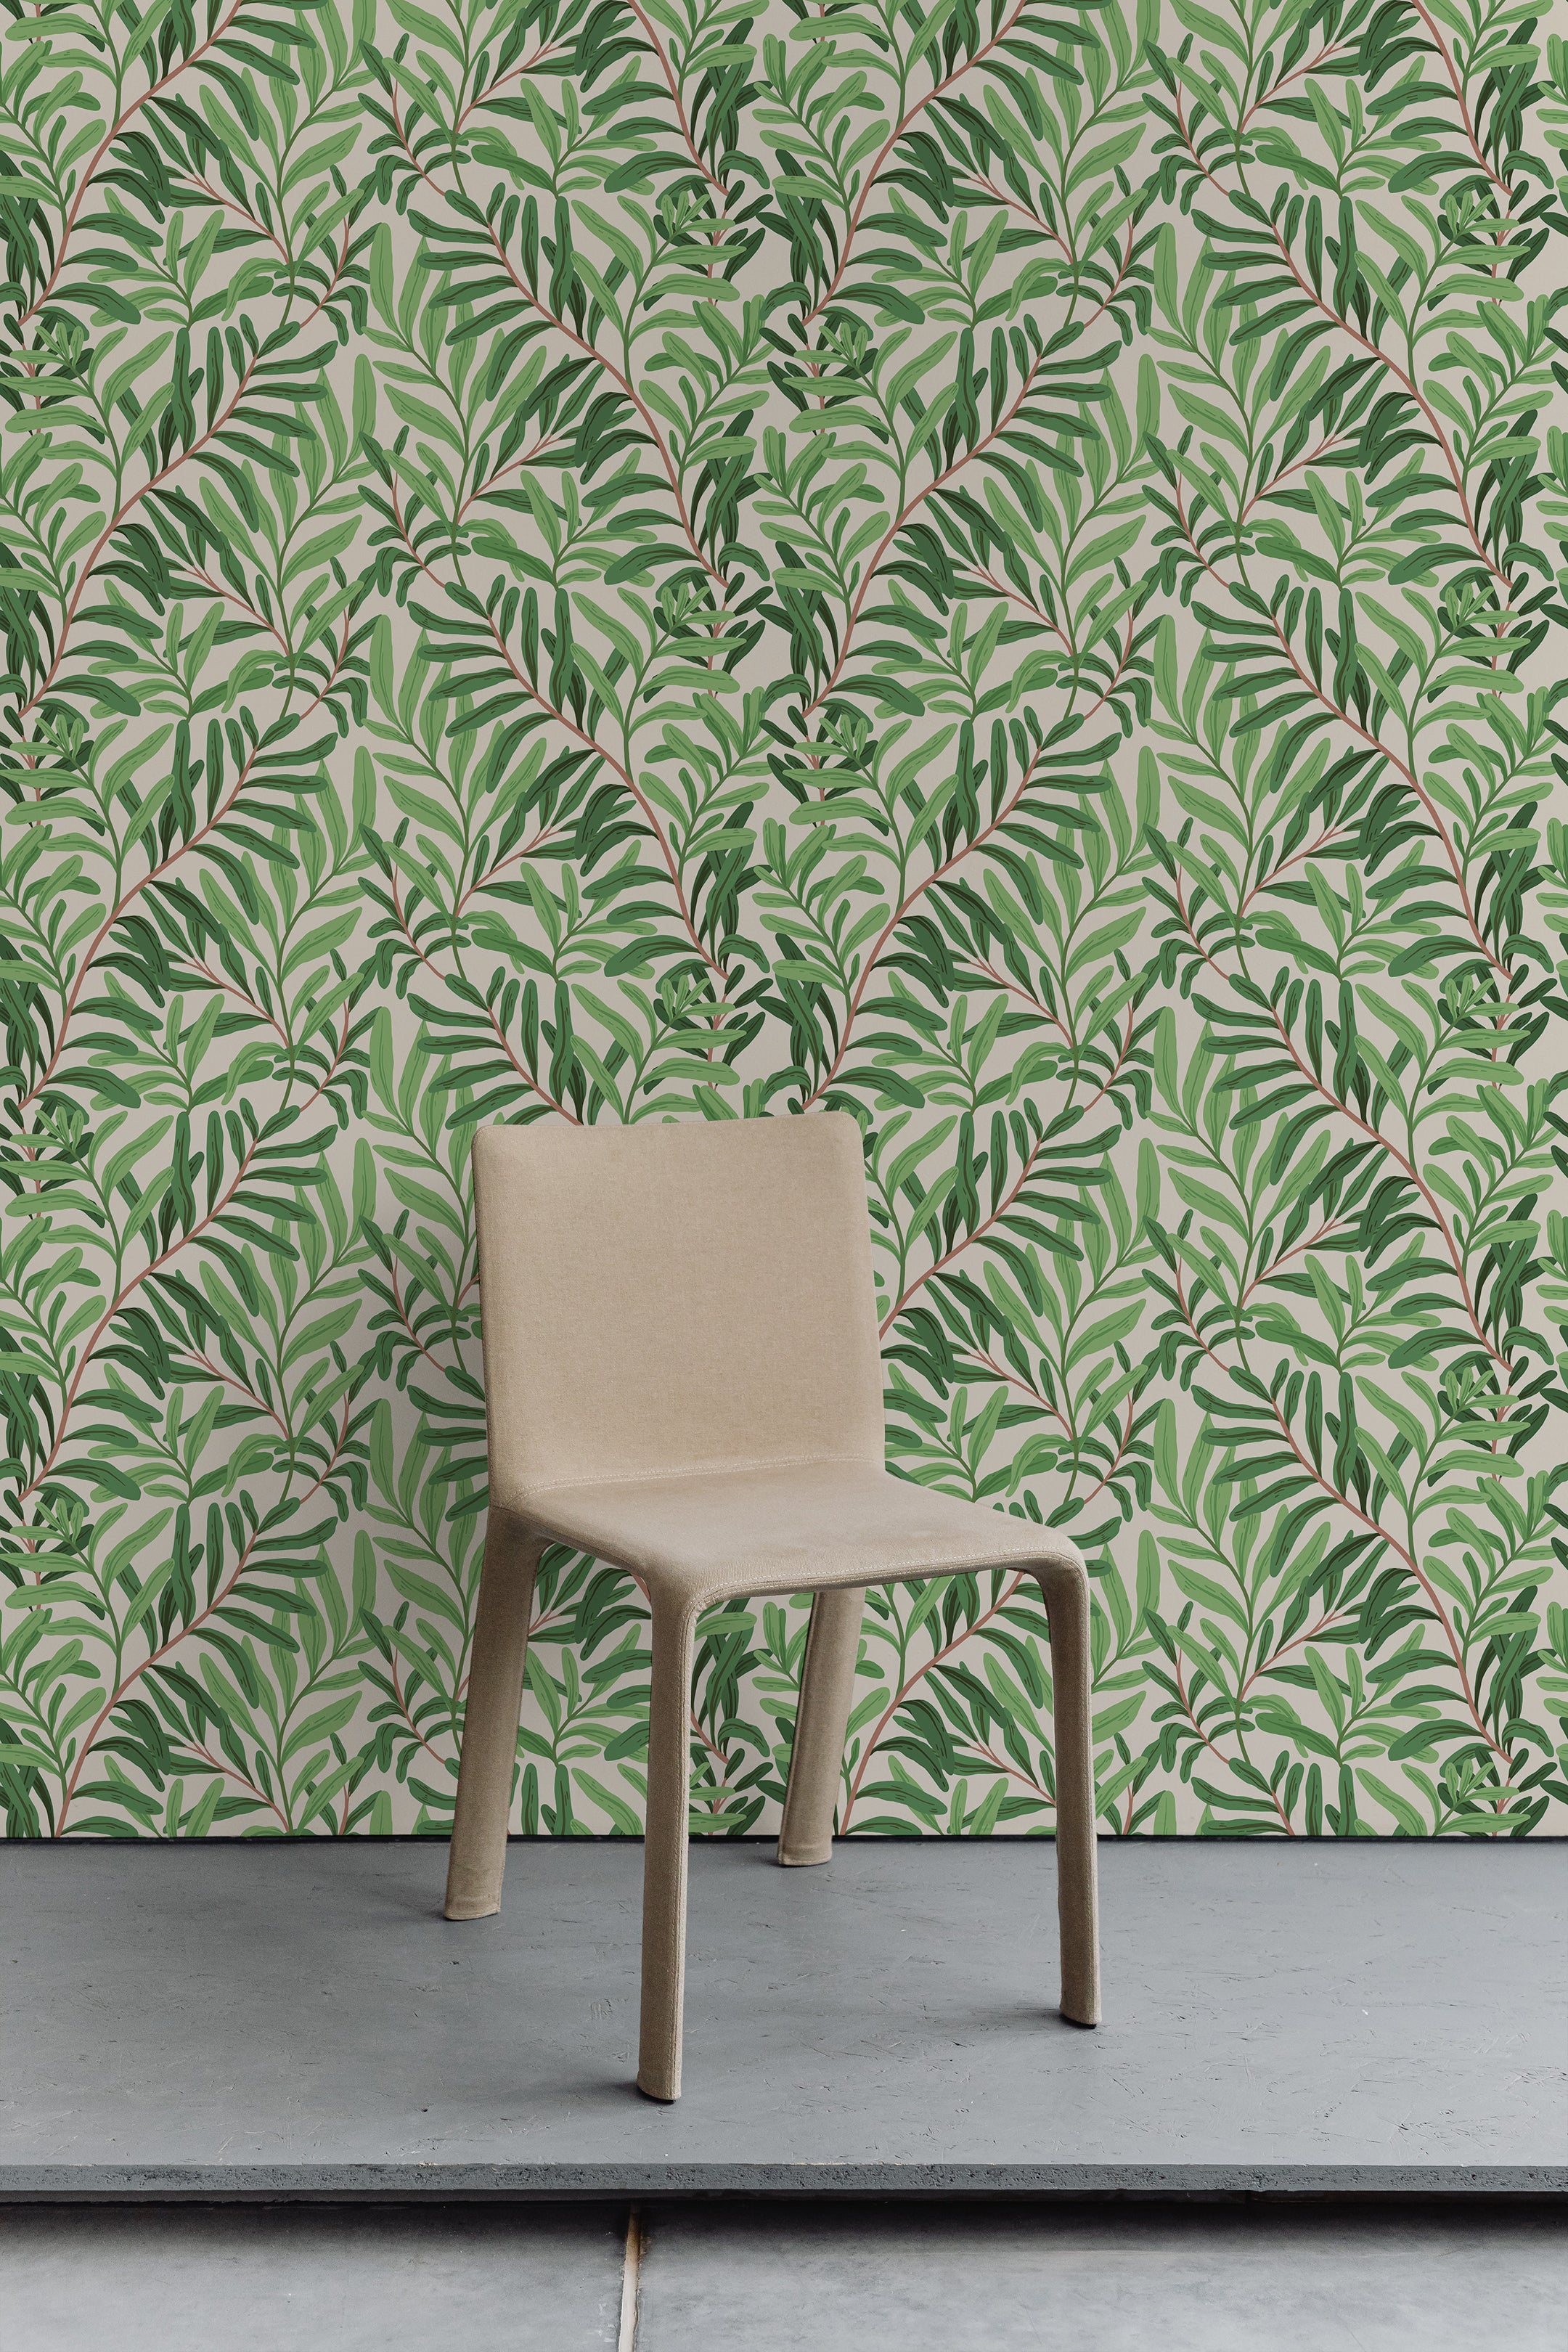 A minimalist room with a botanical wallpaper accent wall. The wallpaper showcases a dense pattern of green leaves on intertwining branches against a light beige background. The room features a simple beige chair placed in front of the wallpaper.